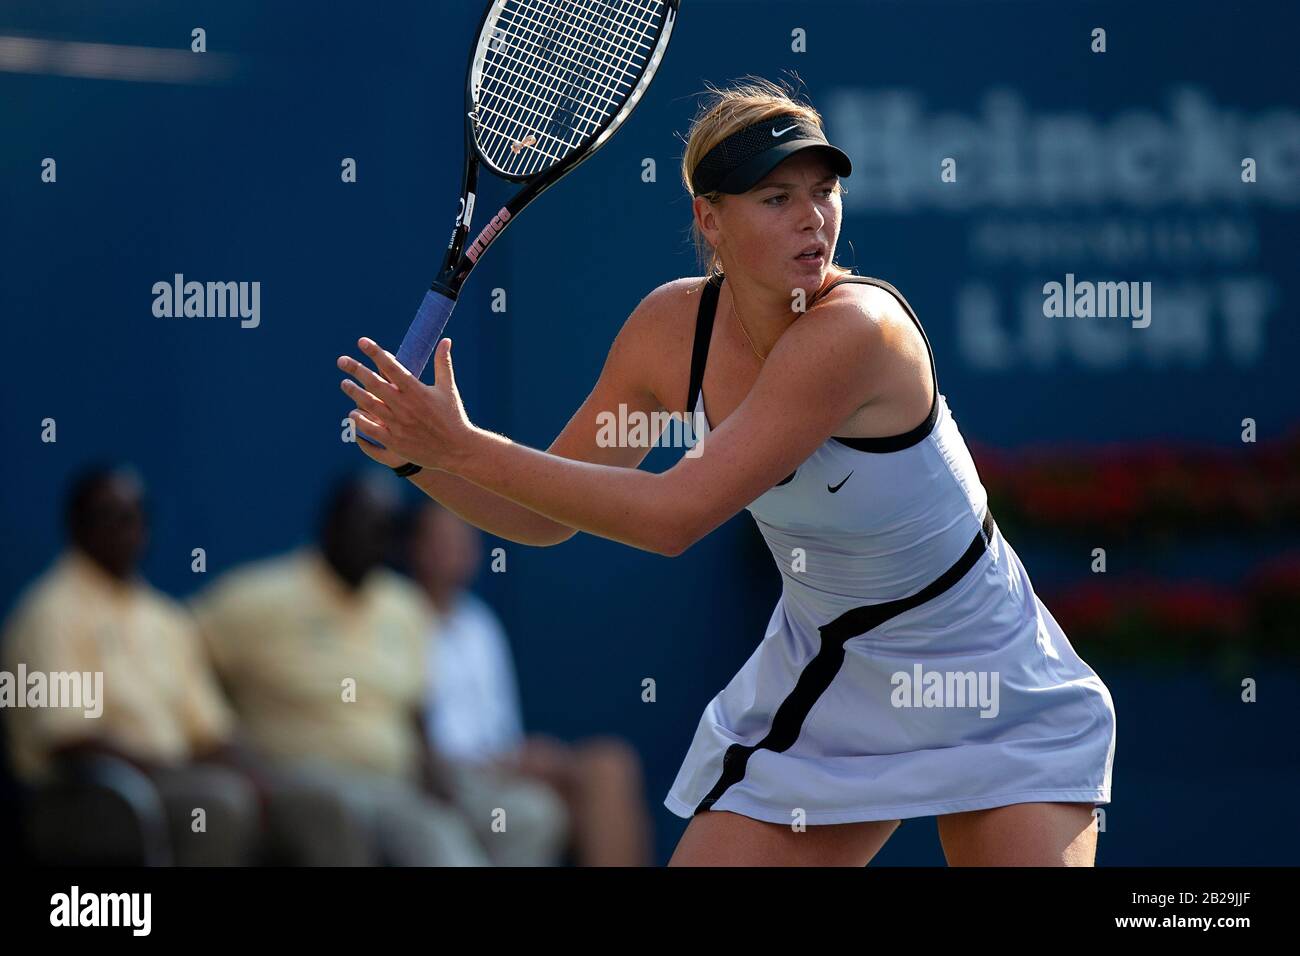 Maria Sharapova in action during her 2006 US Open victory at Flushing Meadows, New York.  She is shown here in her semi final match against against Amelie Mauresmo.  Sharapova, a five time grand slam champion, and one of the highest earning female athletes, announced her retirement from competitive tennis  this week. Stock Photo